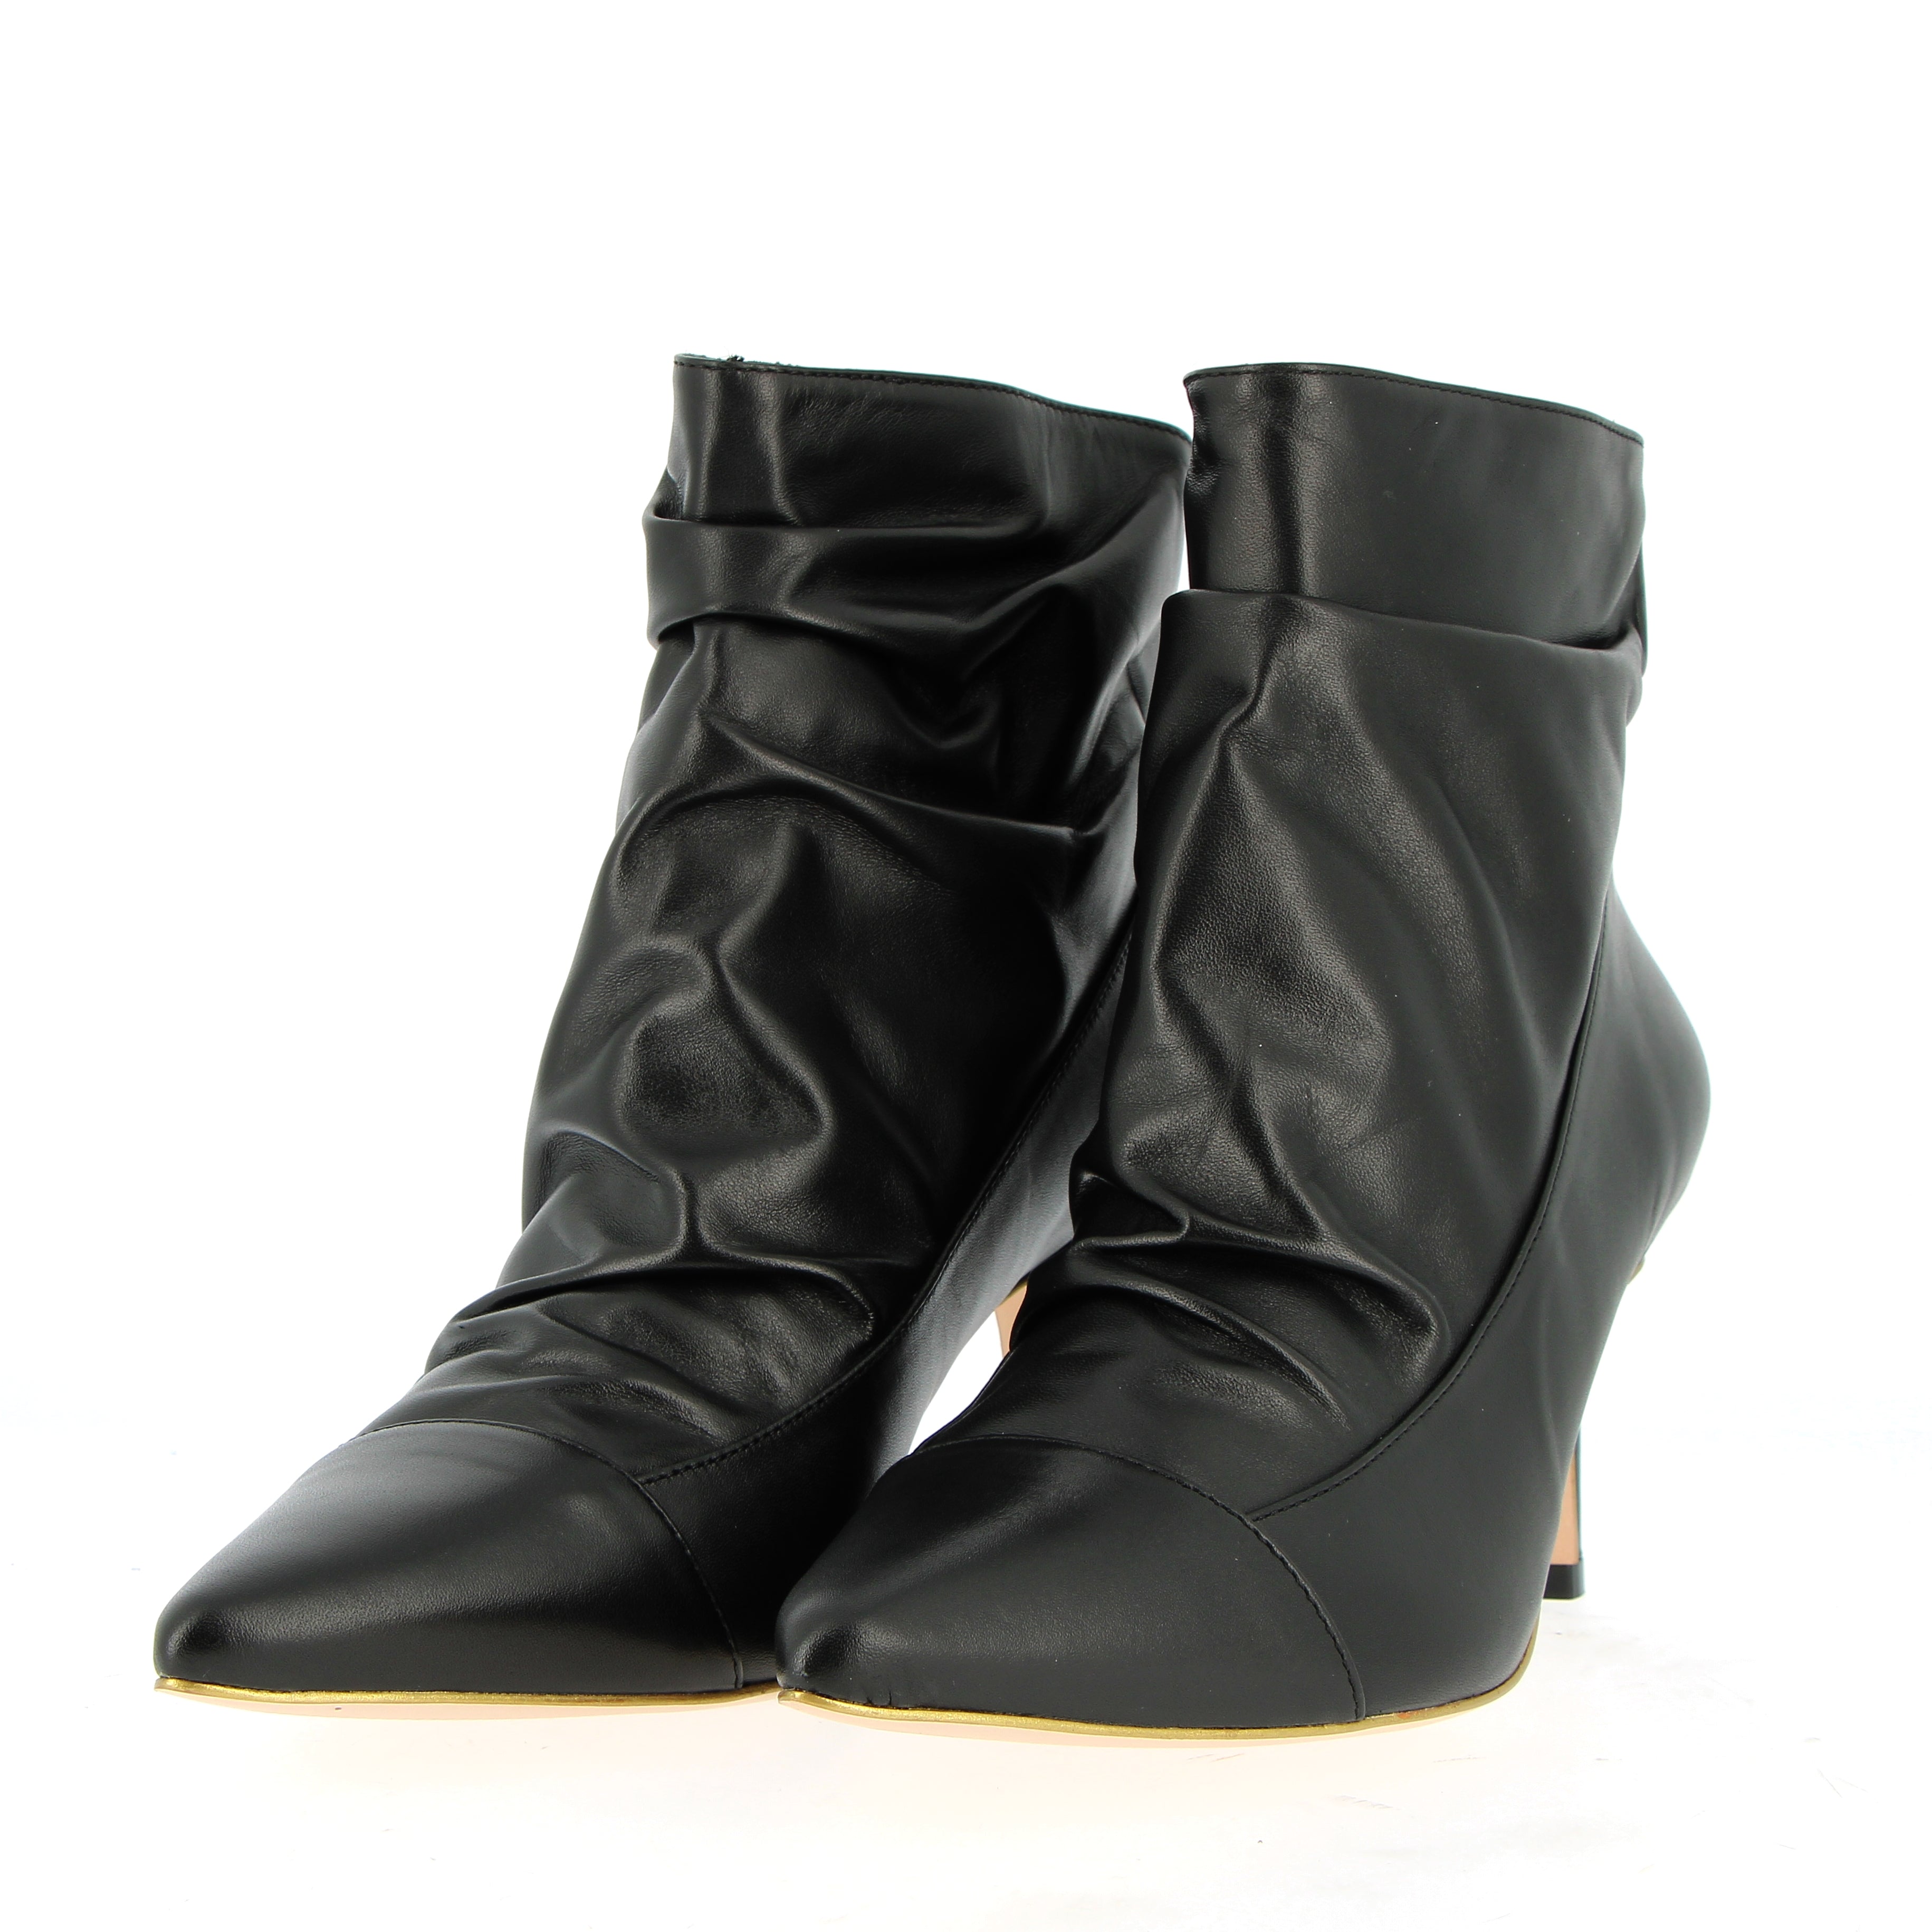 Black ankle boot in soft leather with rear zip